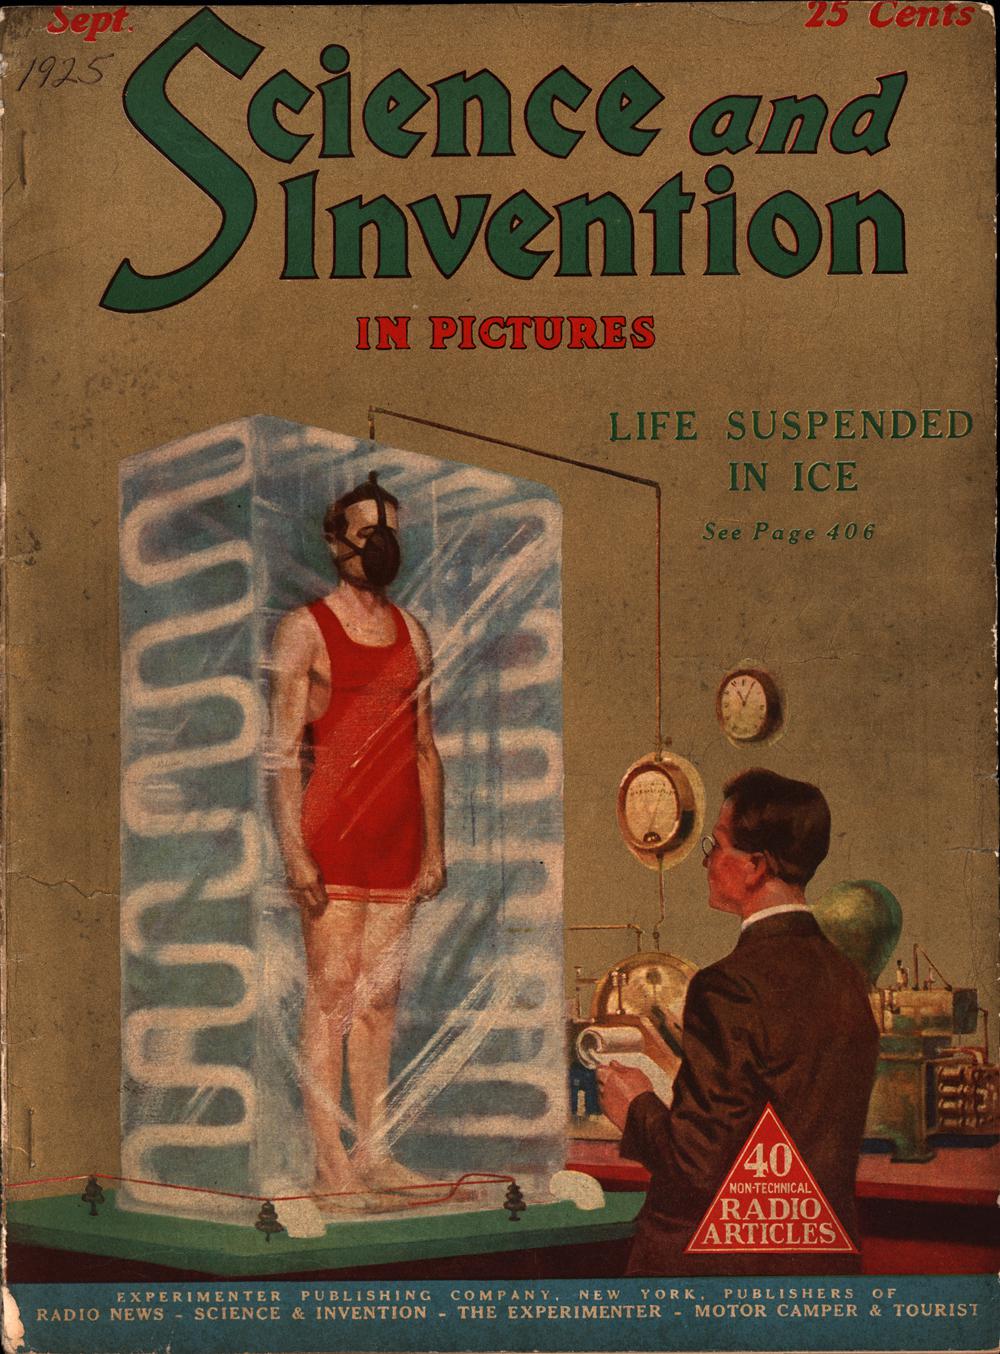 1925 - Science and invention - Vol. 13, No. 5